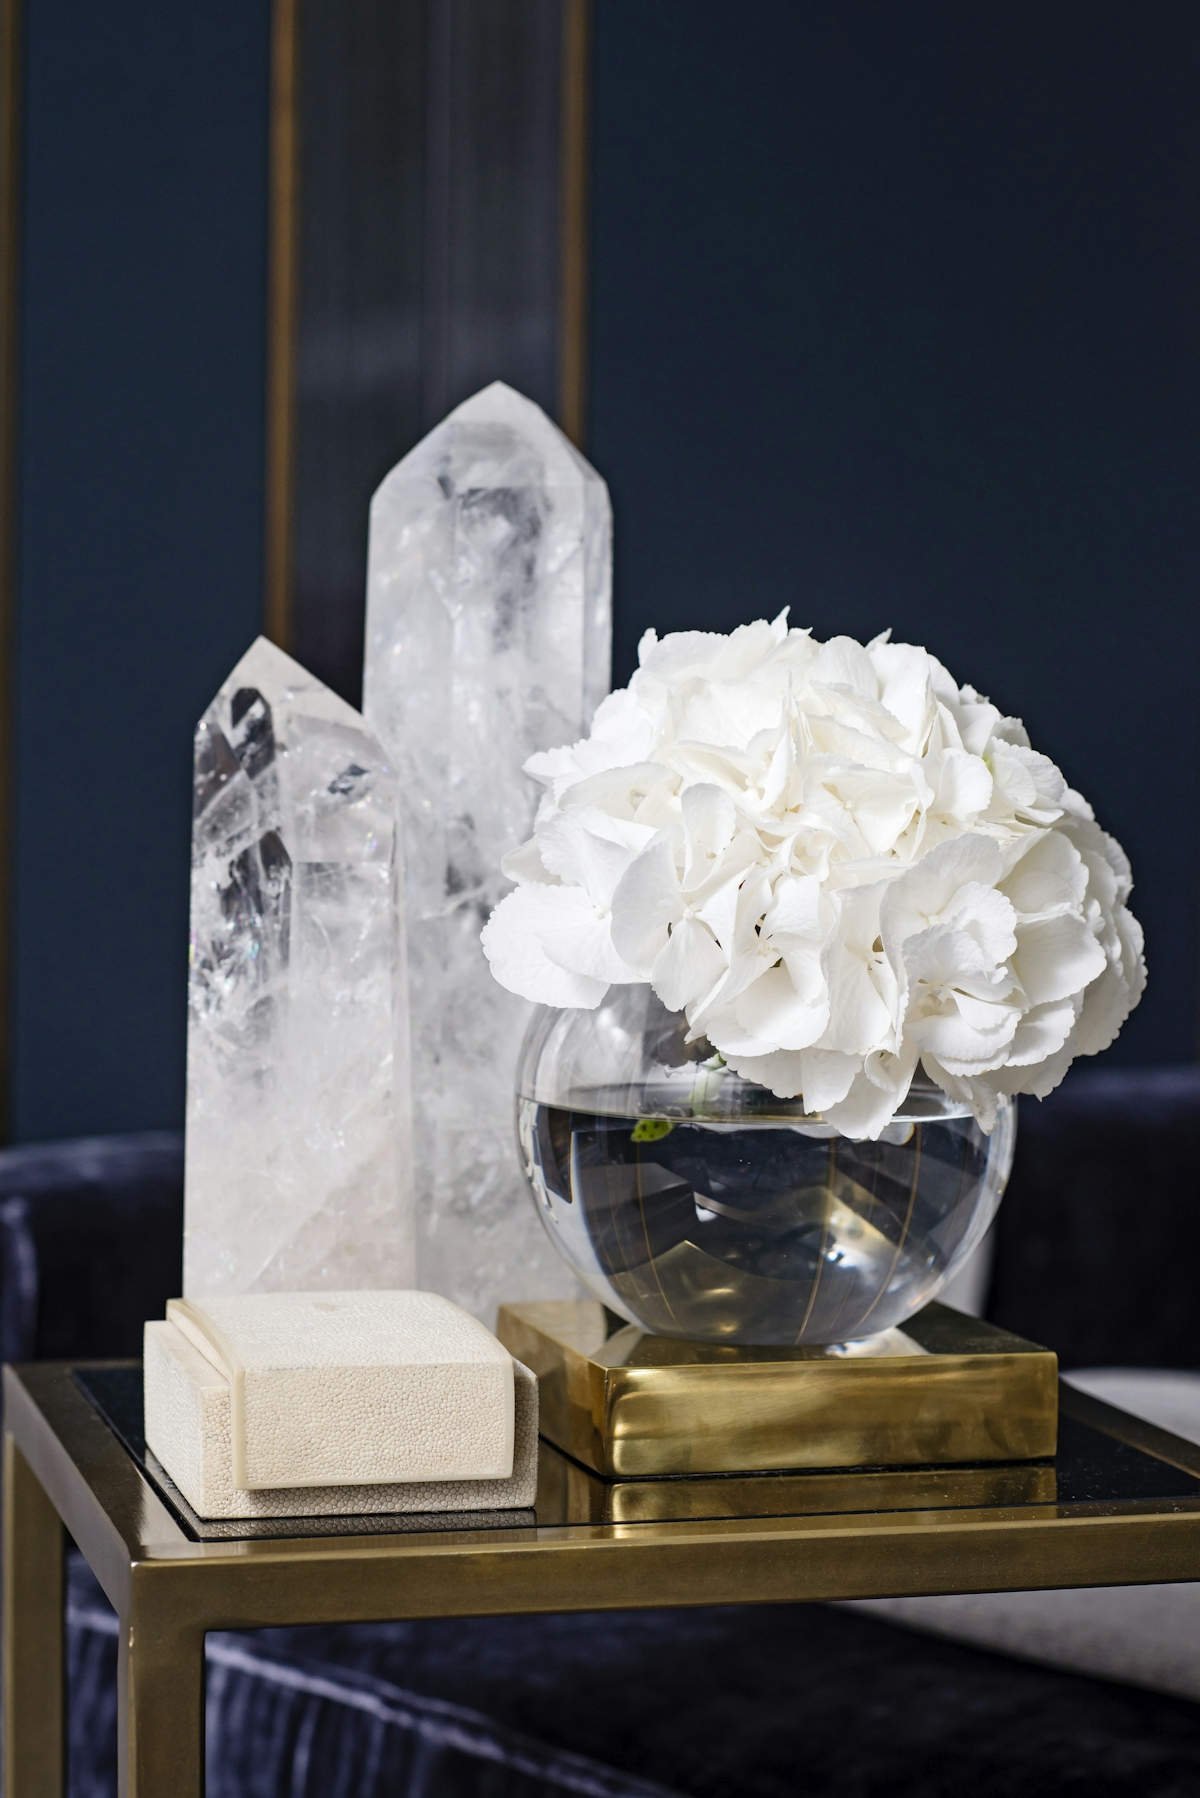 Discover your Accessories Style | Decor Styling Ideas | LuxDeco.com Style Guide